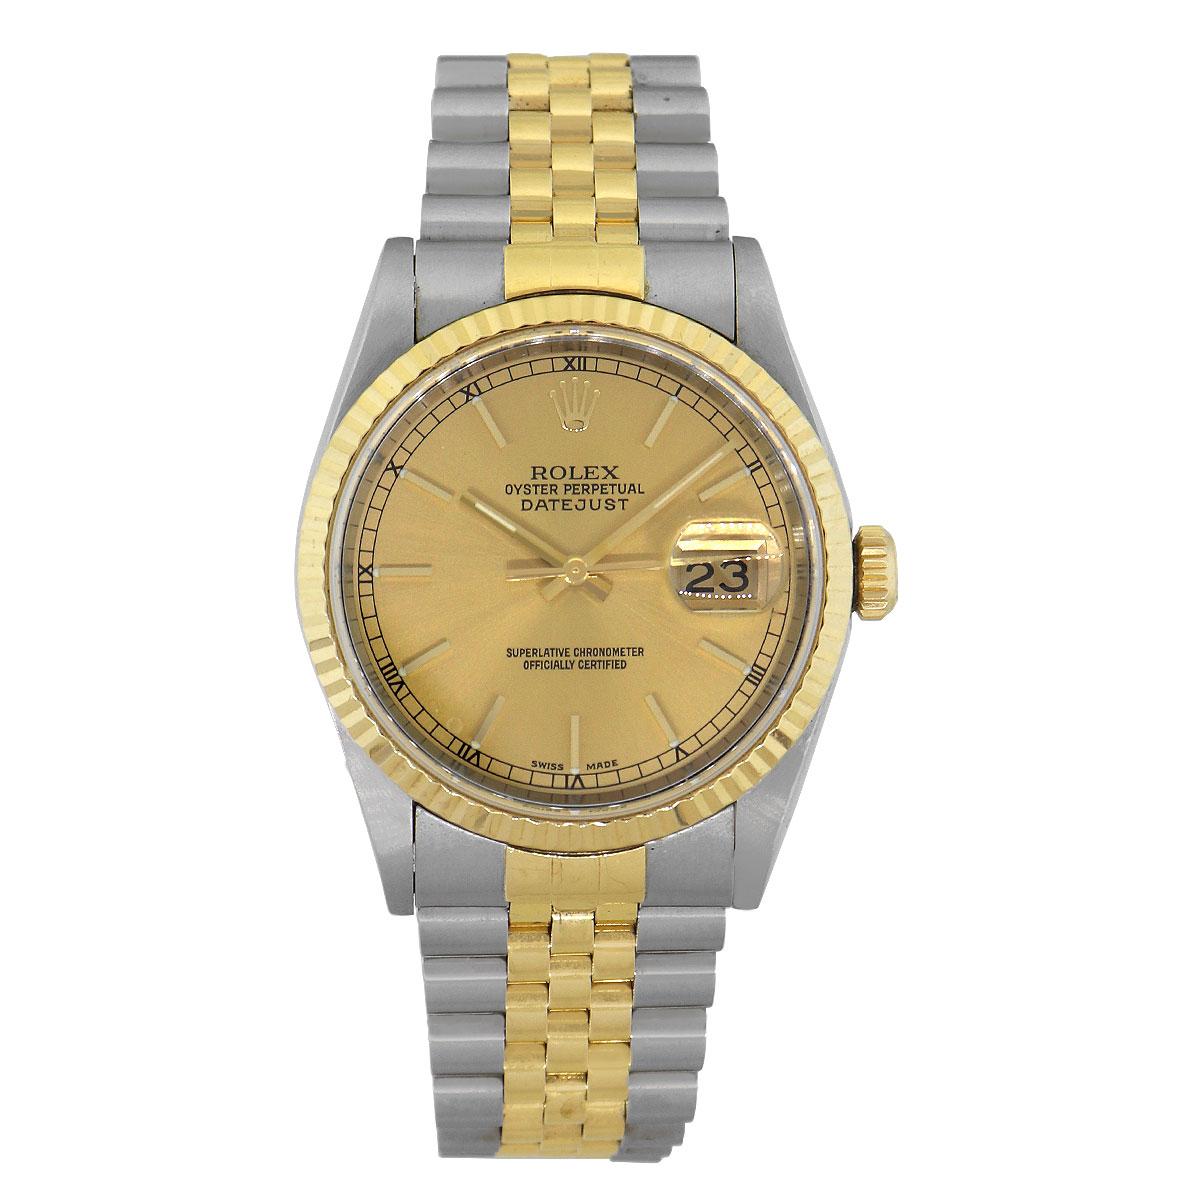 Brand: Rolex
MPN: 16233
Model: Datejust
Case Material: Stainless Steel
Case Diameter: 36mm
Crystal: Scratch resistant sapphire
Bezel: 18k Yellow Gold fluted bezel
Dial: Champagne dial with yellow gold stick hours and hands. Date can be found at 3